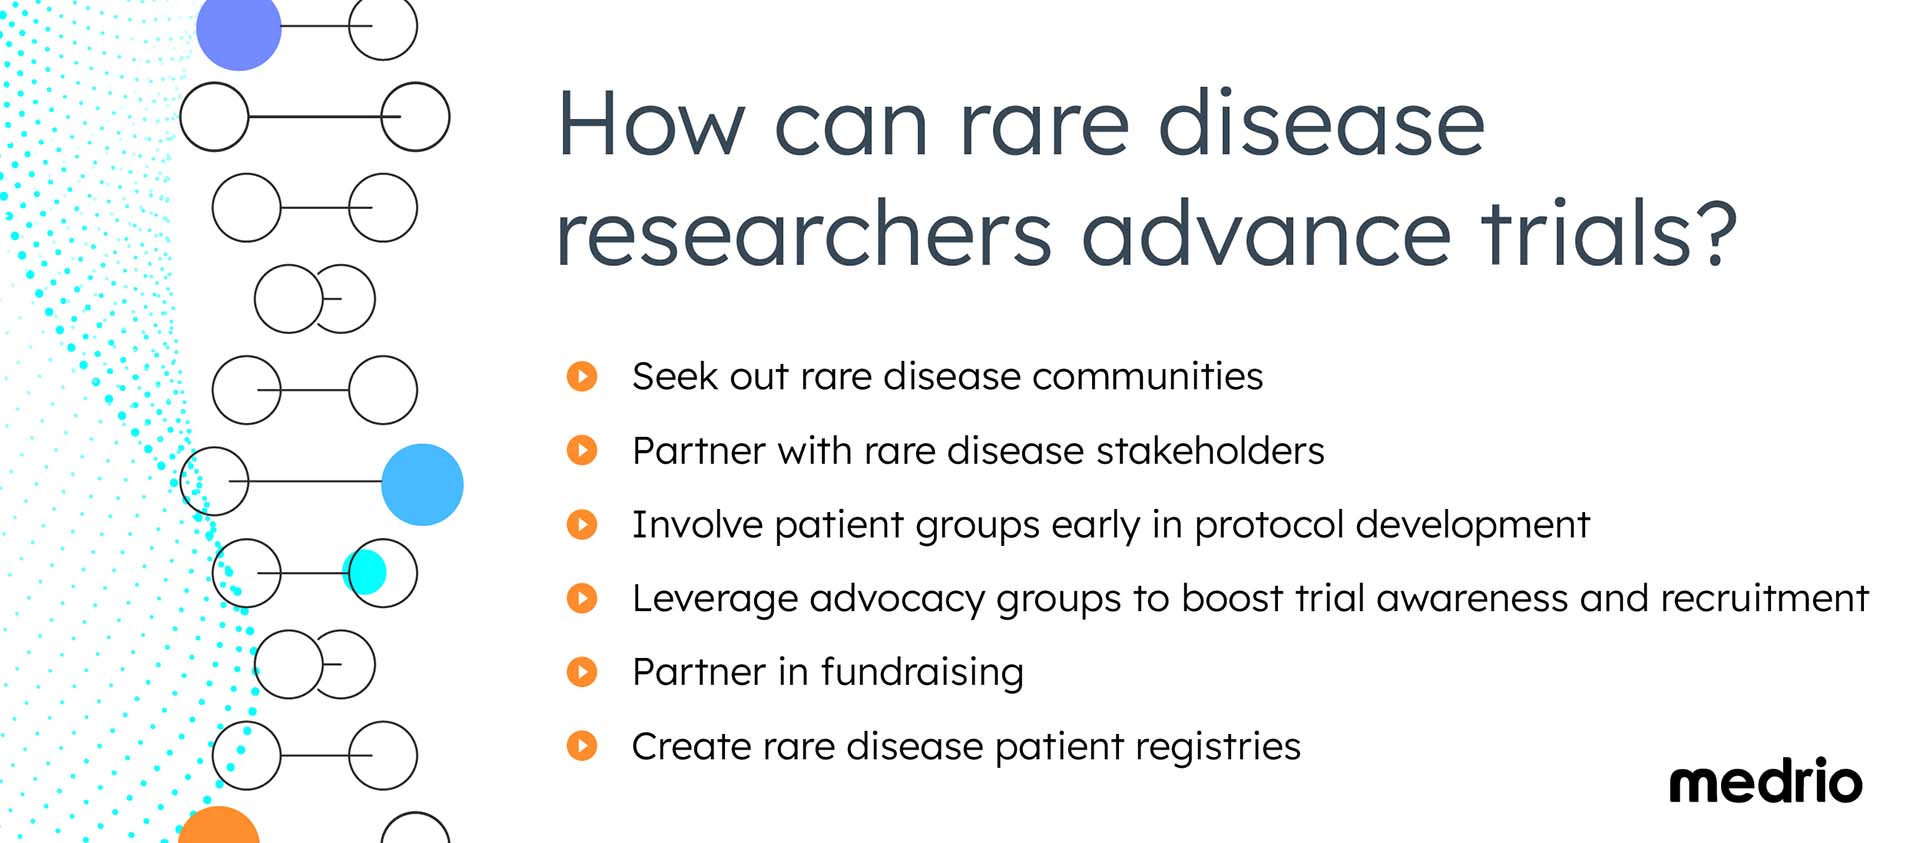 Image of bulleted list depicting how rare disease researchers can advance clinical trials